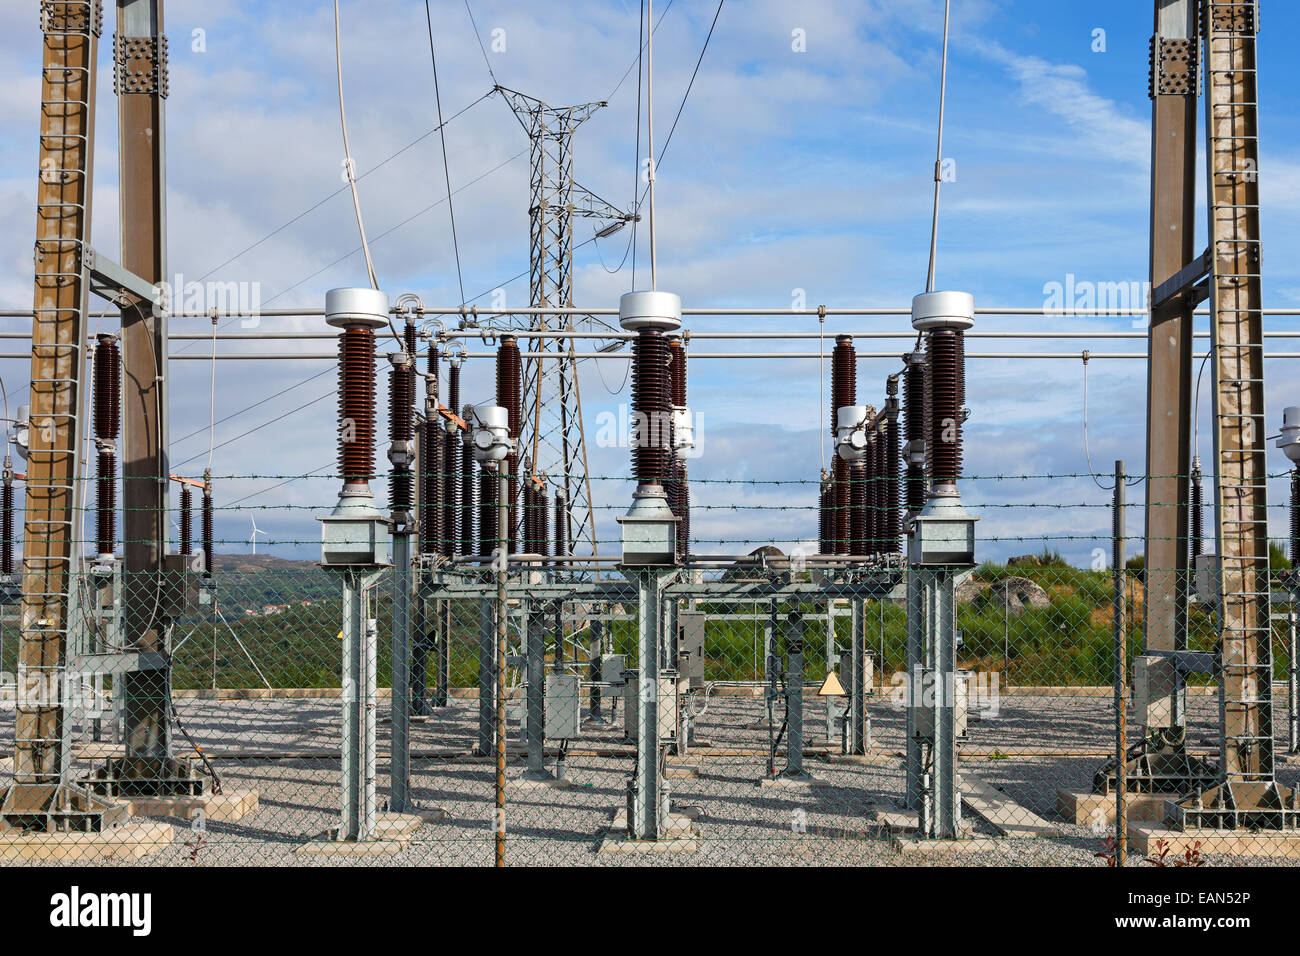 Earthing switches in the Collector Substation connected to wind turbine generators of a wind farm. Terras Altas de Fafe Portugal Stock Photo